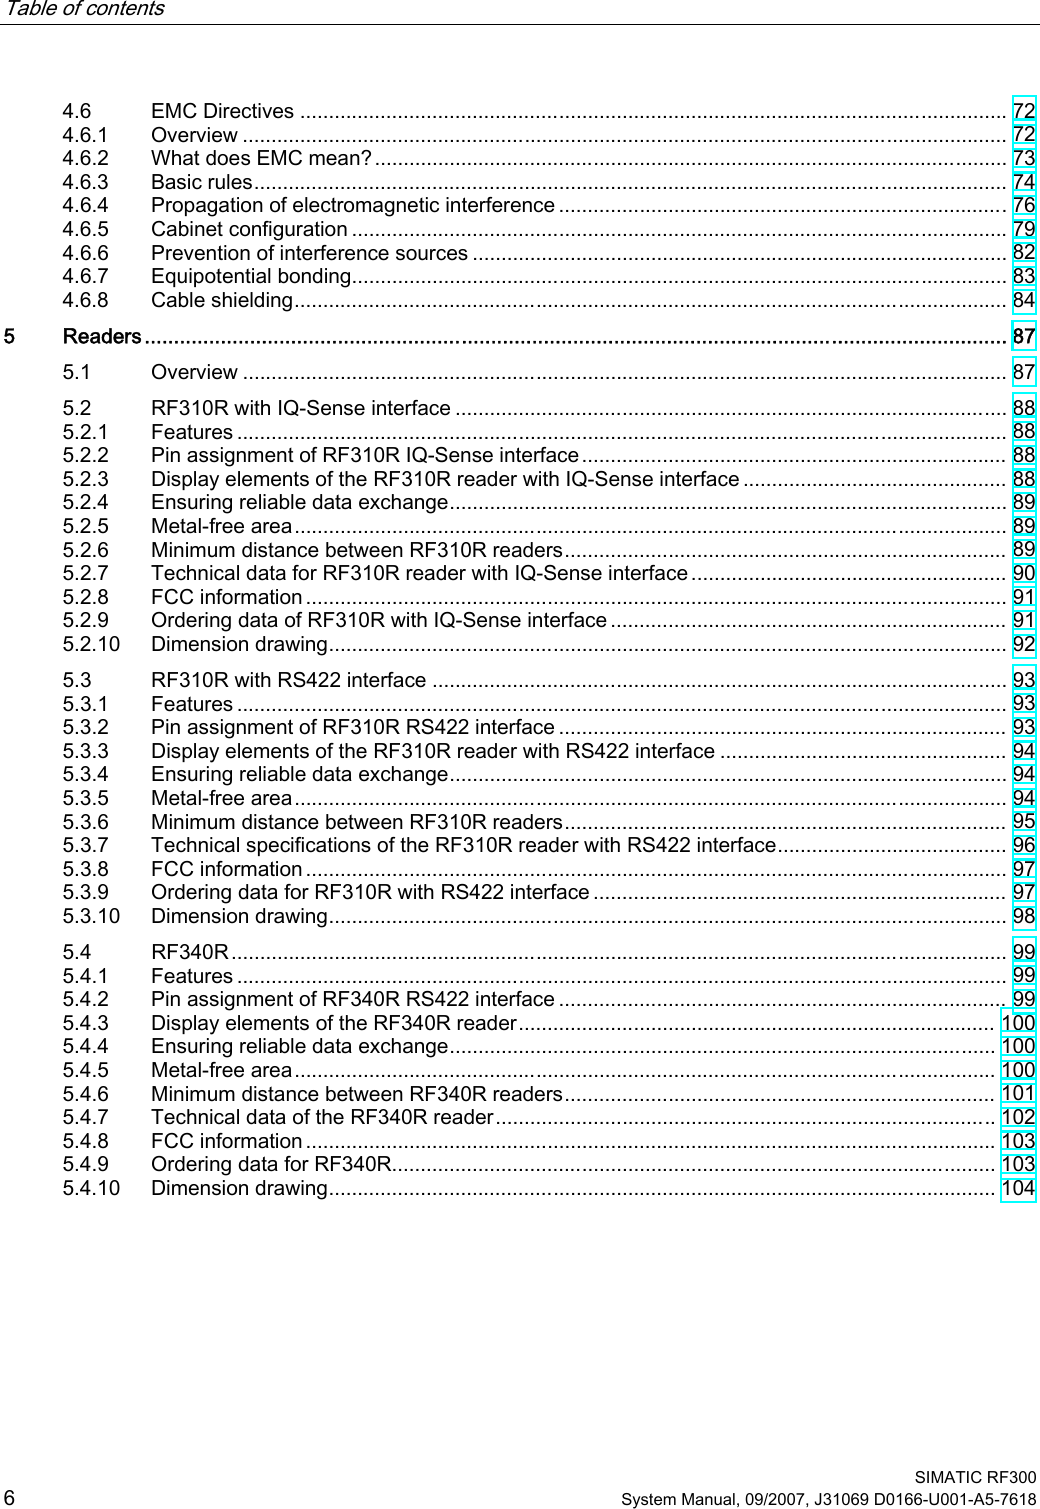 Table of contents      SIMATIC RF300 6 System Manual, 09/2007, J31069 D0166-U001-A5-7618 4.6  EMC Directives ........................................................................................................................... 72 4.6.1  Overview ..................................................................................................................................... 72 4.6.2  What does EMC mean?.............................................................................................................. 73 4.6.3  Basic rules................................................................................................................................... 74 4.6.4  Propagation of electromagnetic interference ..............................................................................76 4.6.5  Cabinet configuration .................................................................................................................. 79 4.6.6  Prevention of interference sources ............................................................................................. 82 4.6.7  Equipotential bonding.................................................................................................................. 83 4.6.8  Cable shielding............................................................................................................................ 84 5  Readers................................................................................................................................................... 87 5.1  Overview ..................................................................................................................................... 87 5.2  RF310R with IQ-Sense interface ................................................................................................ 88 5.2.1  Features ...................................................................................................................................... 88 5.2.2  Pin assignment of RF310R IQ-Sense interface.......................................................................... 88 5.2.3  Display elements of the RF310R reader with IQ-Sense interface .............................................. 88 5.2.4  Ensuring reliable data exchange................................................................................................. 89 5.2.5  Metal-free area............................................................................................................................ 89 5.2.6  Minimum distance between RF310R readers............................................................................. 89 5.2.7  Technical data for RF310R reader with IQ-Sense interface....................................................... 90 5.2.8  FCC information .......................................................................................................................... 91 5.2.9  Ordering data of RF310R with IQ-Sense interface ..................................................................... 91 5.2.10  Dimension drawing...................................................................................................................... 92 5.3  RF310R with RS422 interface .................................................................................................... 93 5.3.1  Features ...................................................................................................................................... 93 5.3.2  Pin assignment of RF310R RS422 interface .............................................................................. 93 5.3.3  Display elements of the RF310R reader with RS422 interface .................................................. 94 5.3.4  Ensuring reliable data exchange................................................................................................. 94 5.3.5  Metal-free area............................................................................................................................ 94 5.3.6  Minimum distance between RF310R readers............................................................................. 95 5.3.7  Technical specifications of the RF310R reader with RS422 interface........................................ 96 5.3.8  FCC information .......................................................................................................................... 97 5.3.9  Ordering data for RF310R with RS422 interface ........................................................................ 97 5.3.10  Dimension drawing...................................................................................................................... 98 5.4  RF340R....................................................................................................................................... 99 5.4.1  Features ...................................................................................................................................... 99 5.4.2  Pin assignment of RF340R RS422 interface .............................................................................. 99 5.4.3  Display elements of the RF340R reader................................................................................... 100 5.4.4  Ensuring reliable data exchange............................................................................................... 100 5.4.5  Metal-free area.......................................................................................................................... 100 5.4.6  Minimum distance between RF340R readers........................................................................... 101 5.4.7  Technical data of the RF340R reader....................................................................................... 102 5.4.8  FCC information ........................................................................................................................ 103 5.4.9  Ordering data for RF340R......................................................................................................... 103 5.4.10  Dimension drawing.................................................................................................................... 104 